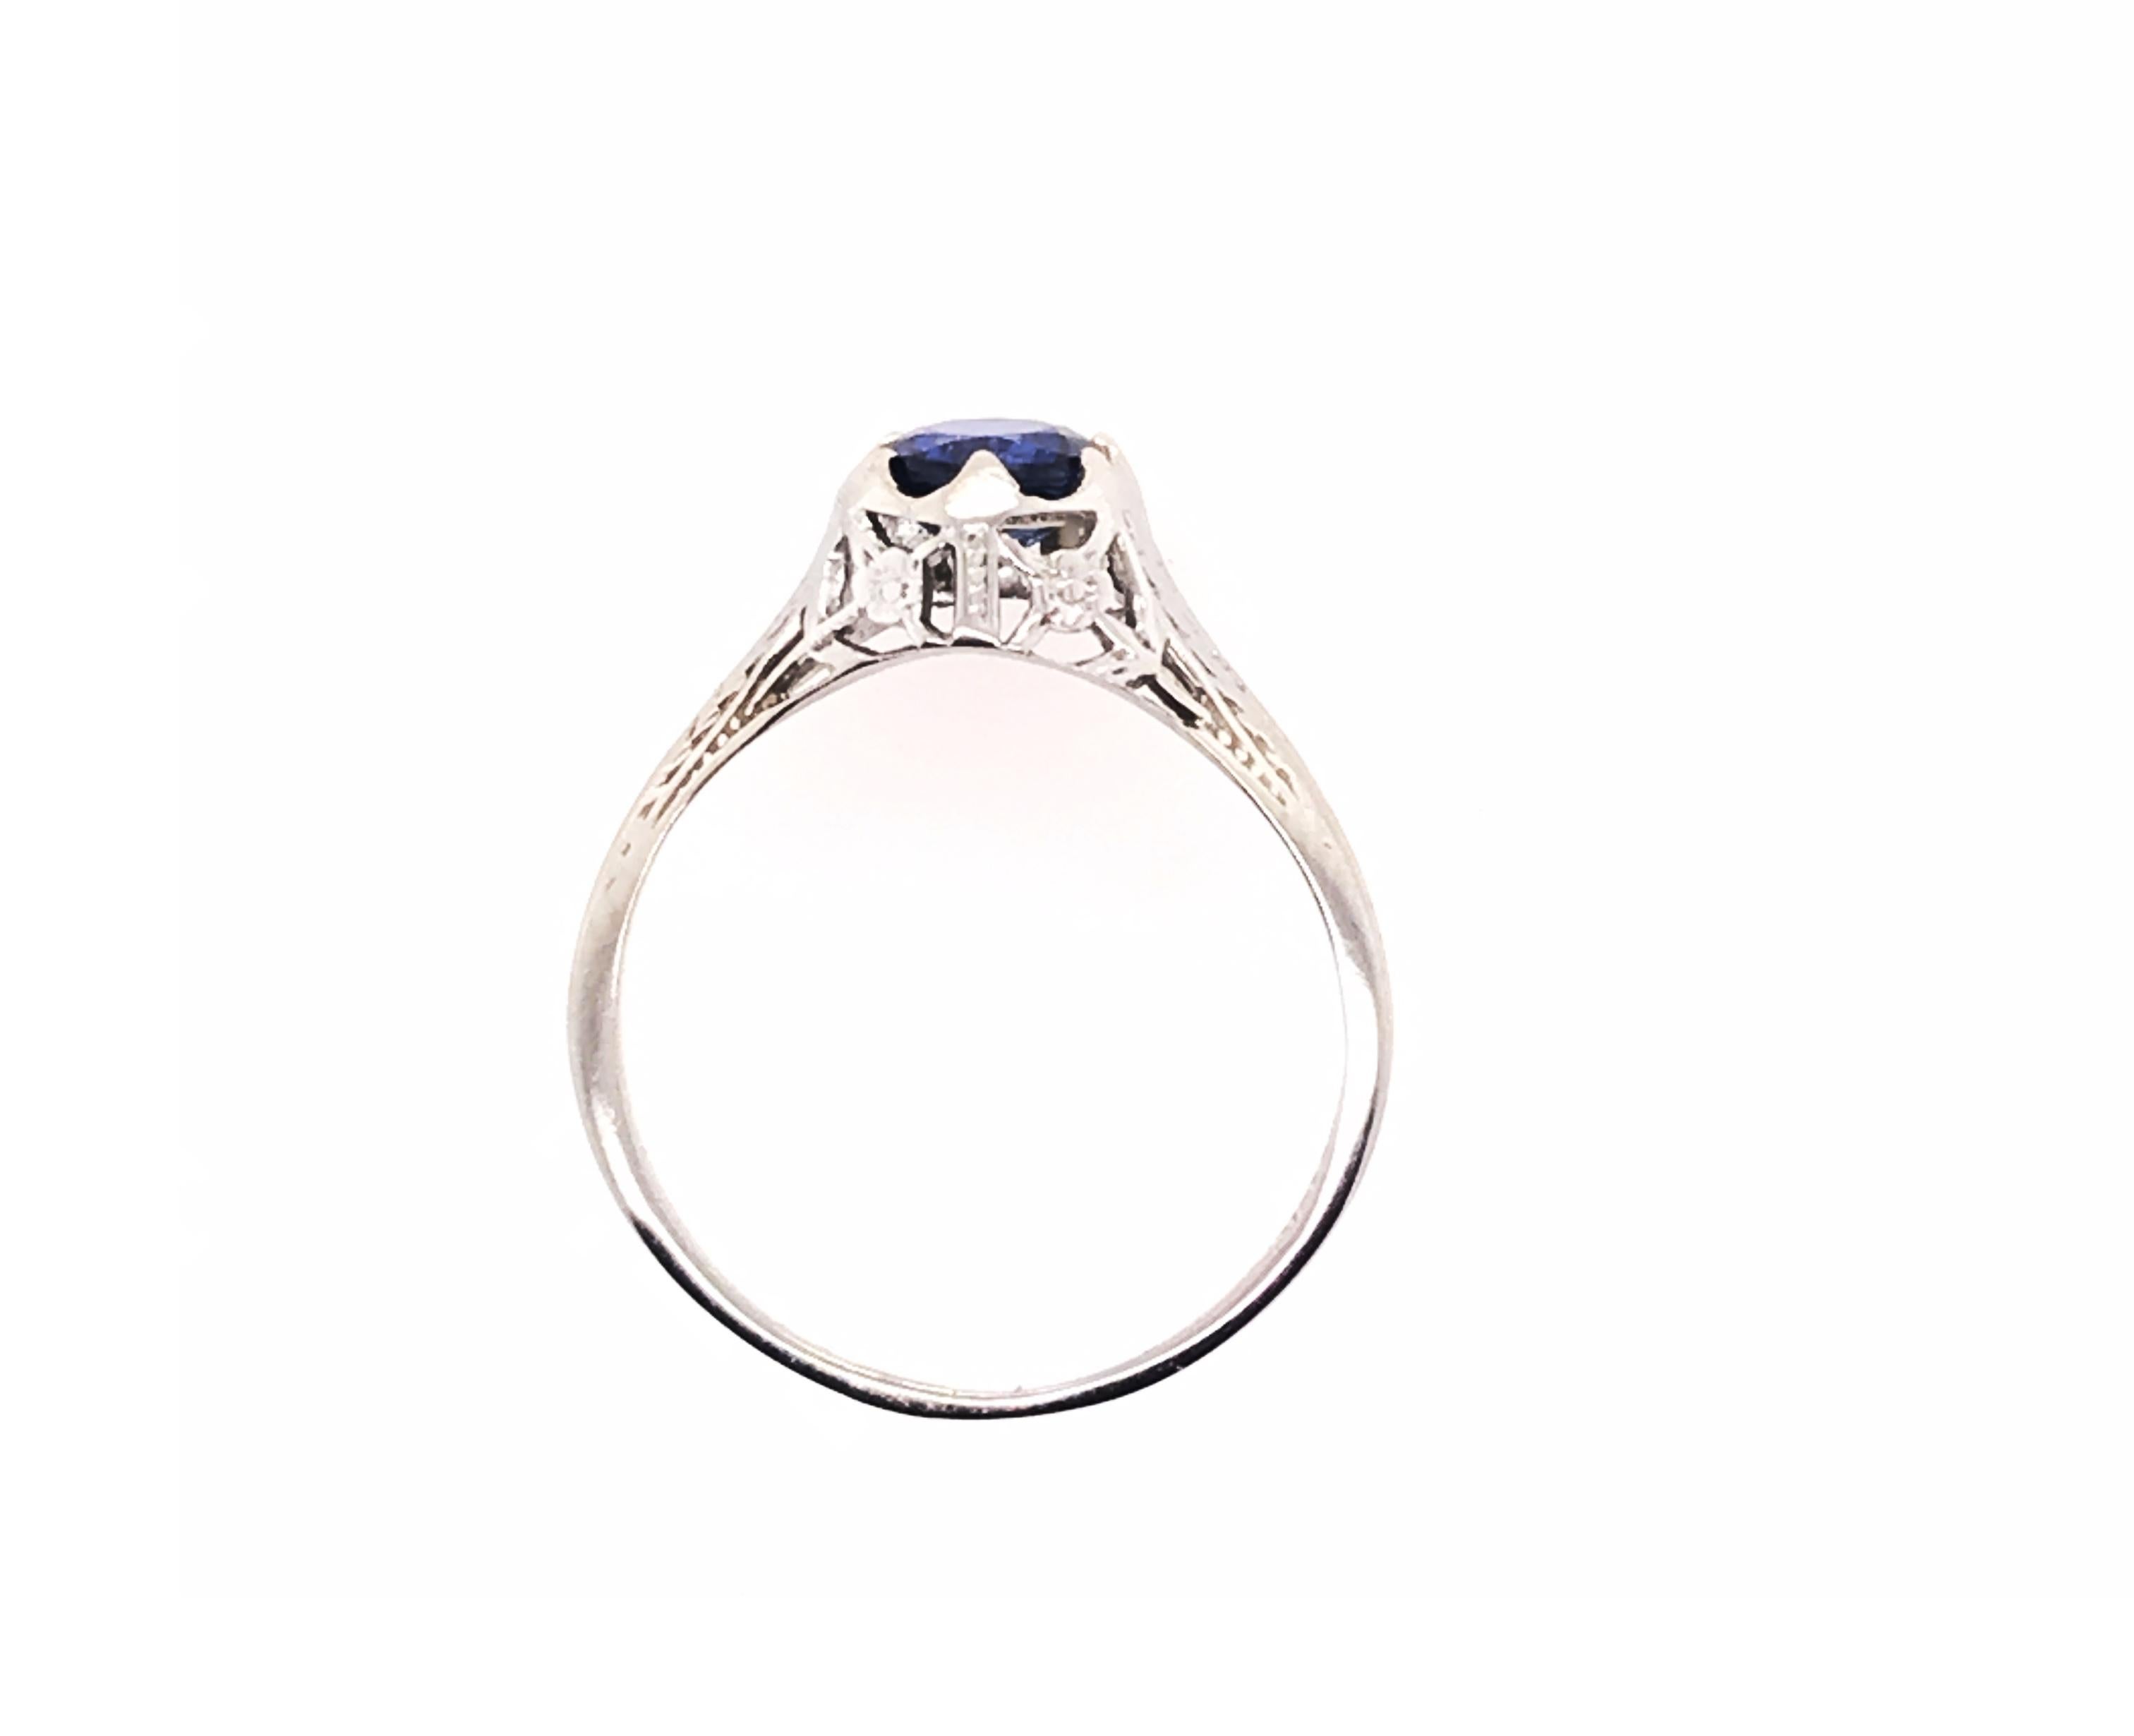 Genuine Original Art Deco Antique from the 1920's-1930's .65ct Sapphire 18K White Gold Ring


Featuring a Gorgeous .65ct Genuine Natural Blue Round Sapphire Center

Belais Brothers Ring, First Jewelers in the Industry to Craft Jewelry Out of 18K